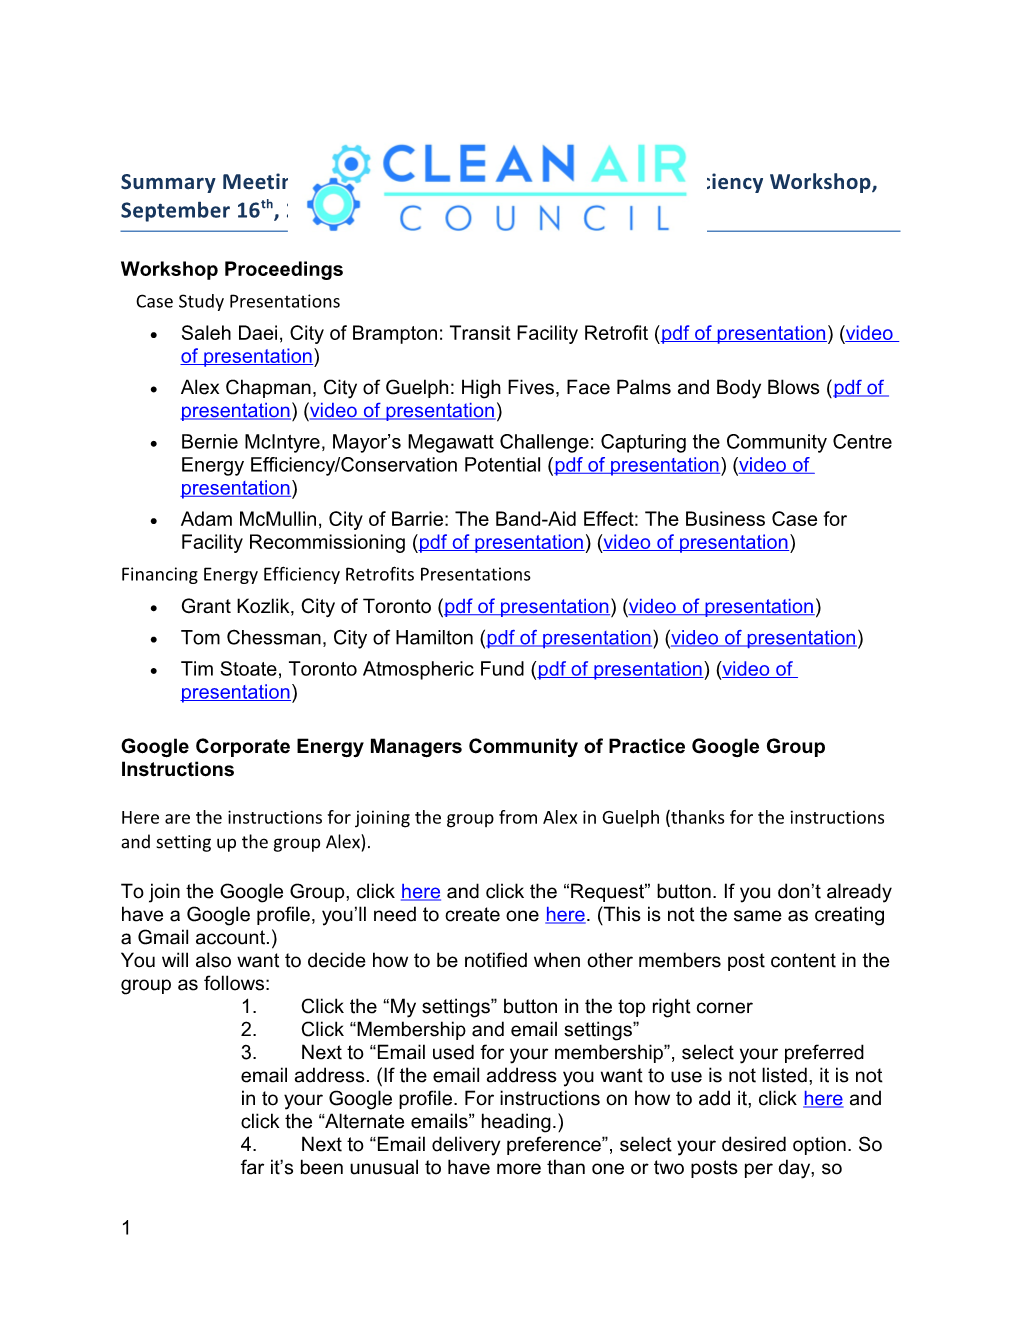 Summary Meeting Notes: Municipal Corporate Energy Efficiency Workshop, September 16Th, 2016